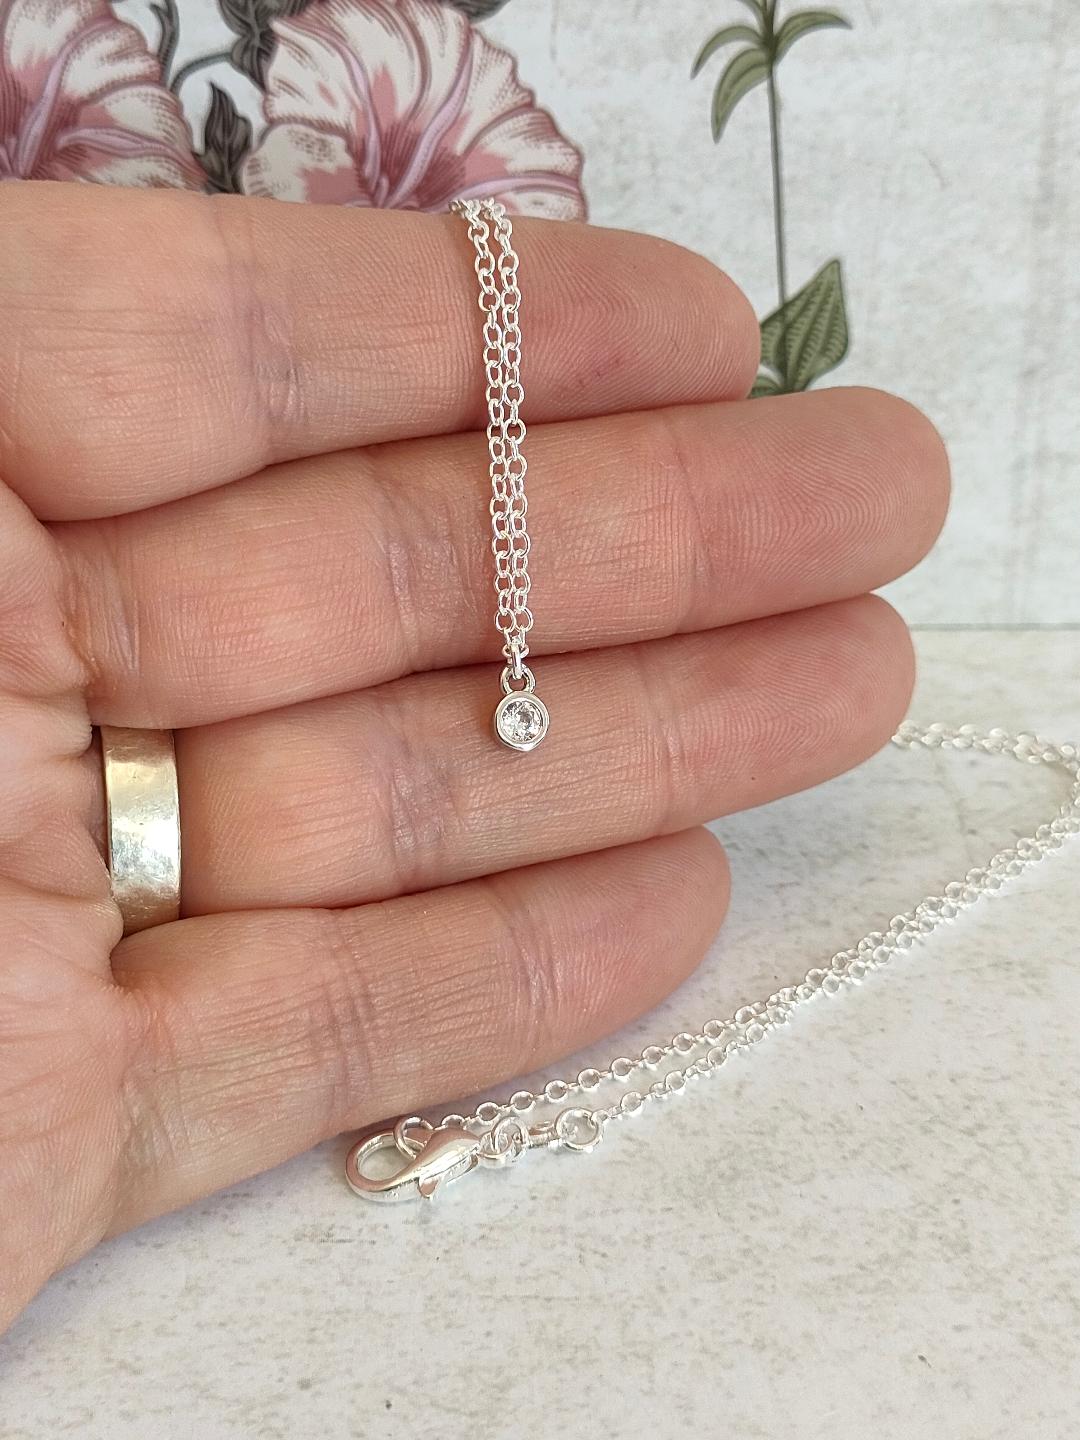 Cubic Zirconia Necklace, Tiny Round CZ Pendant Necklace, Dainty Silver 925 Necklace, Gemstone Necklace for her